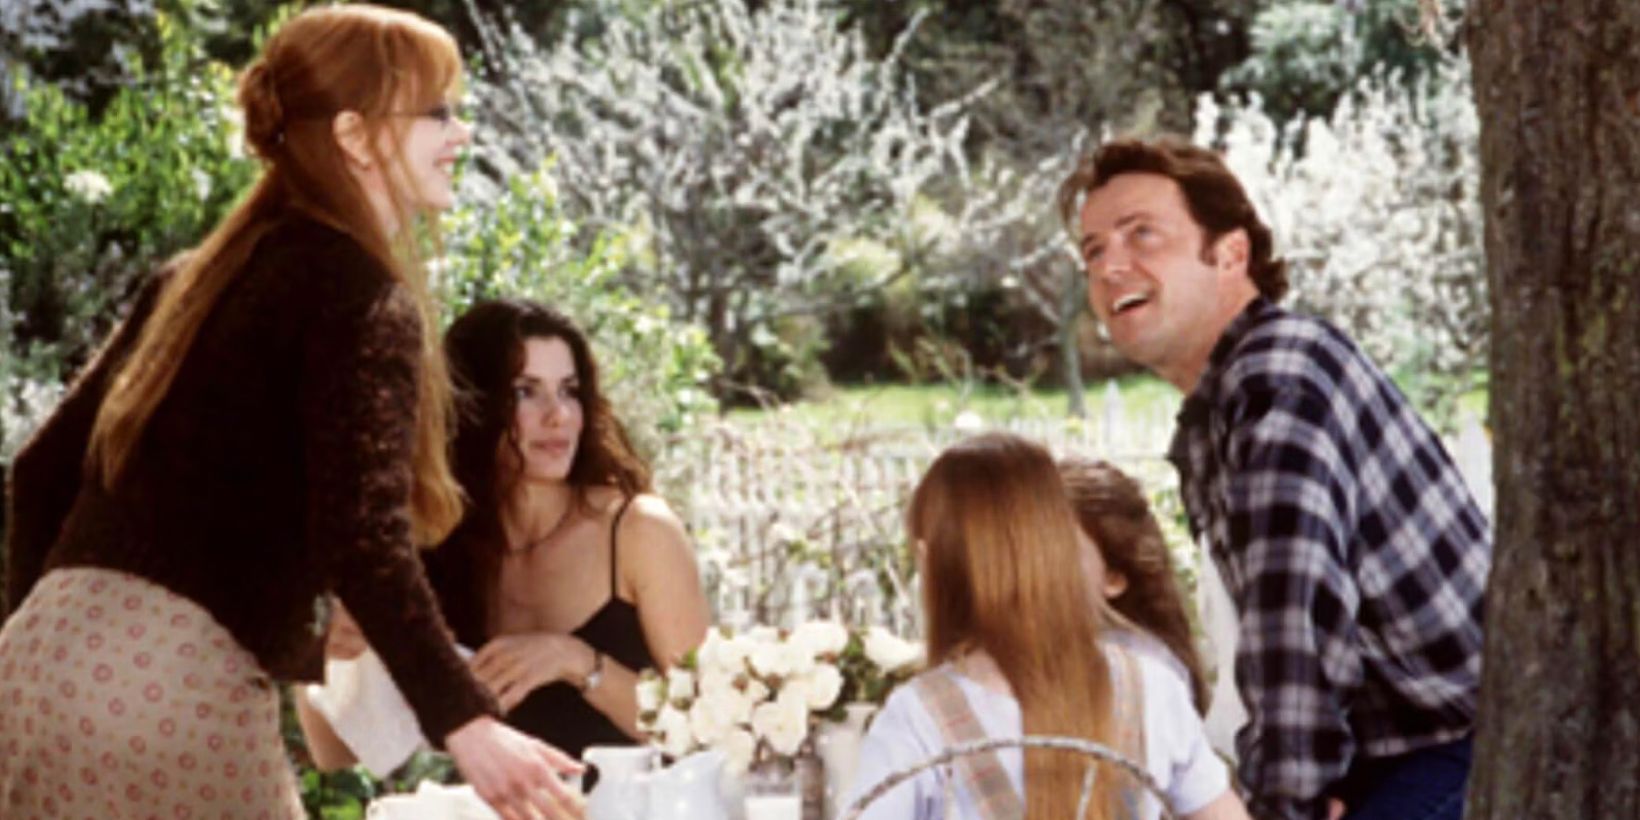 The family with the officer at breakfast outside in Practical Magic